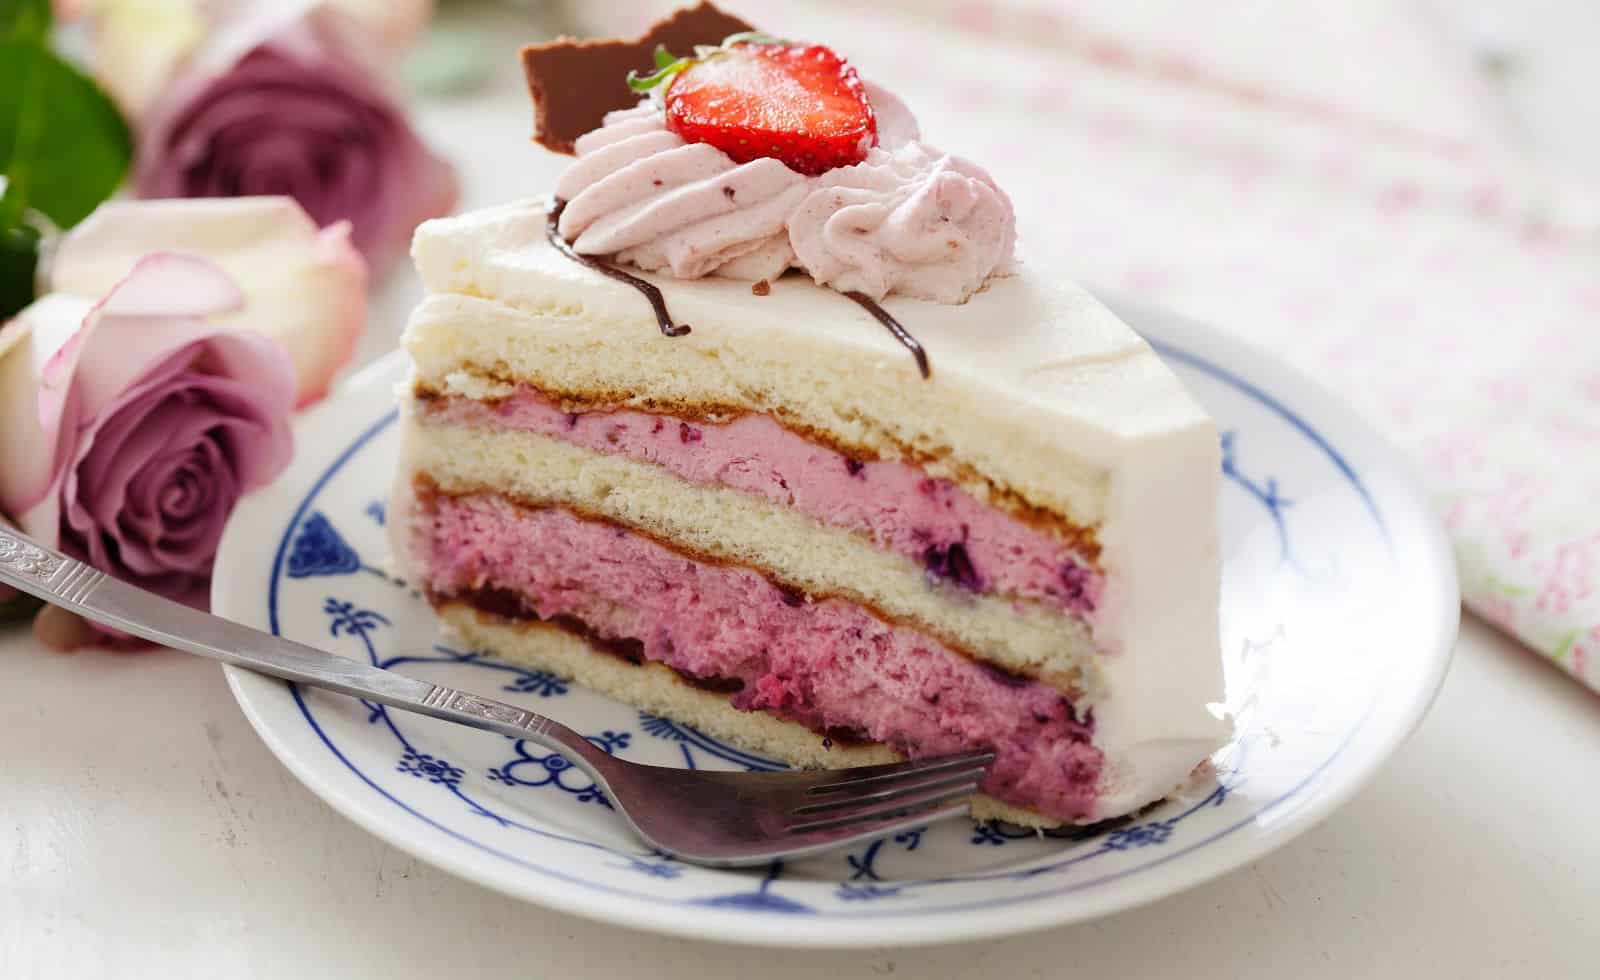 slice of layered cake with berry mousse and with chocolate icing